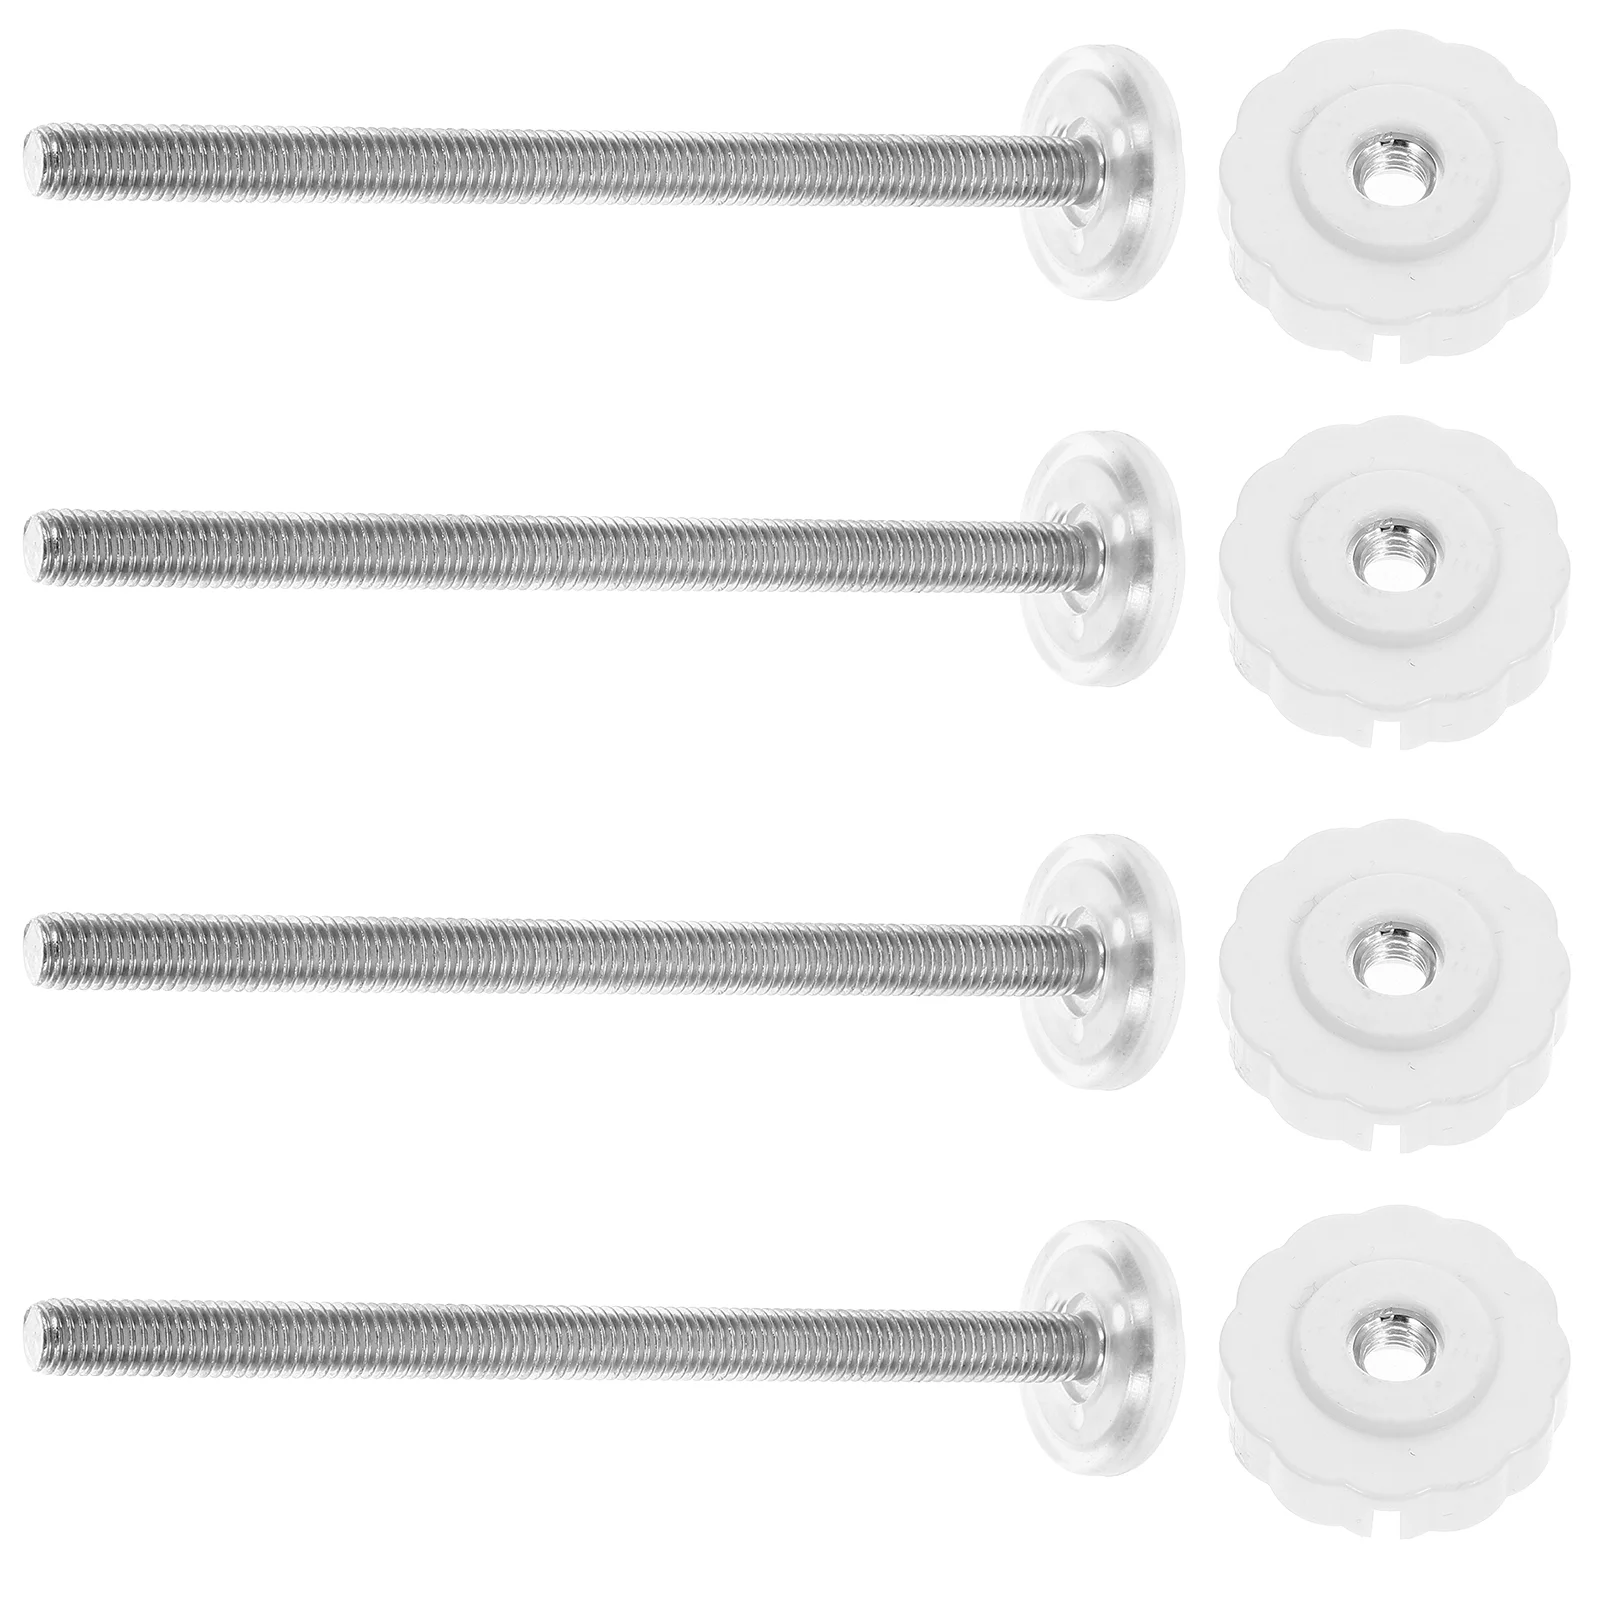 

4 Pcs Bolts Hardware Threaded Replacement Parts Pet Gates Mounting Kit Accessories Screws